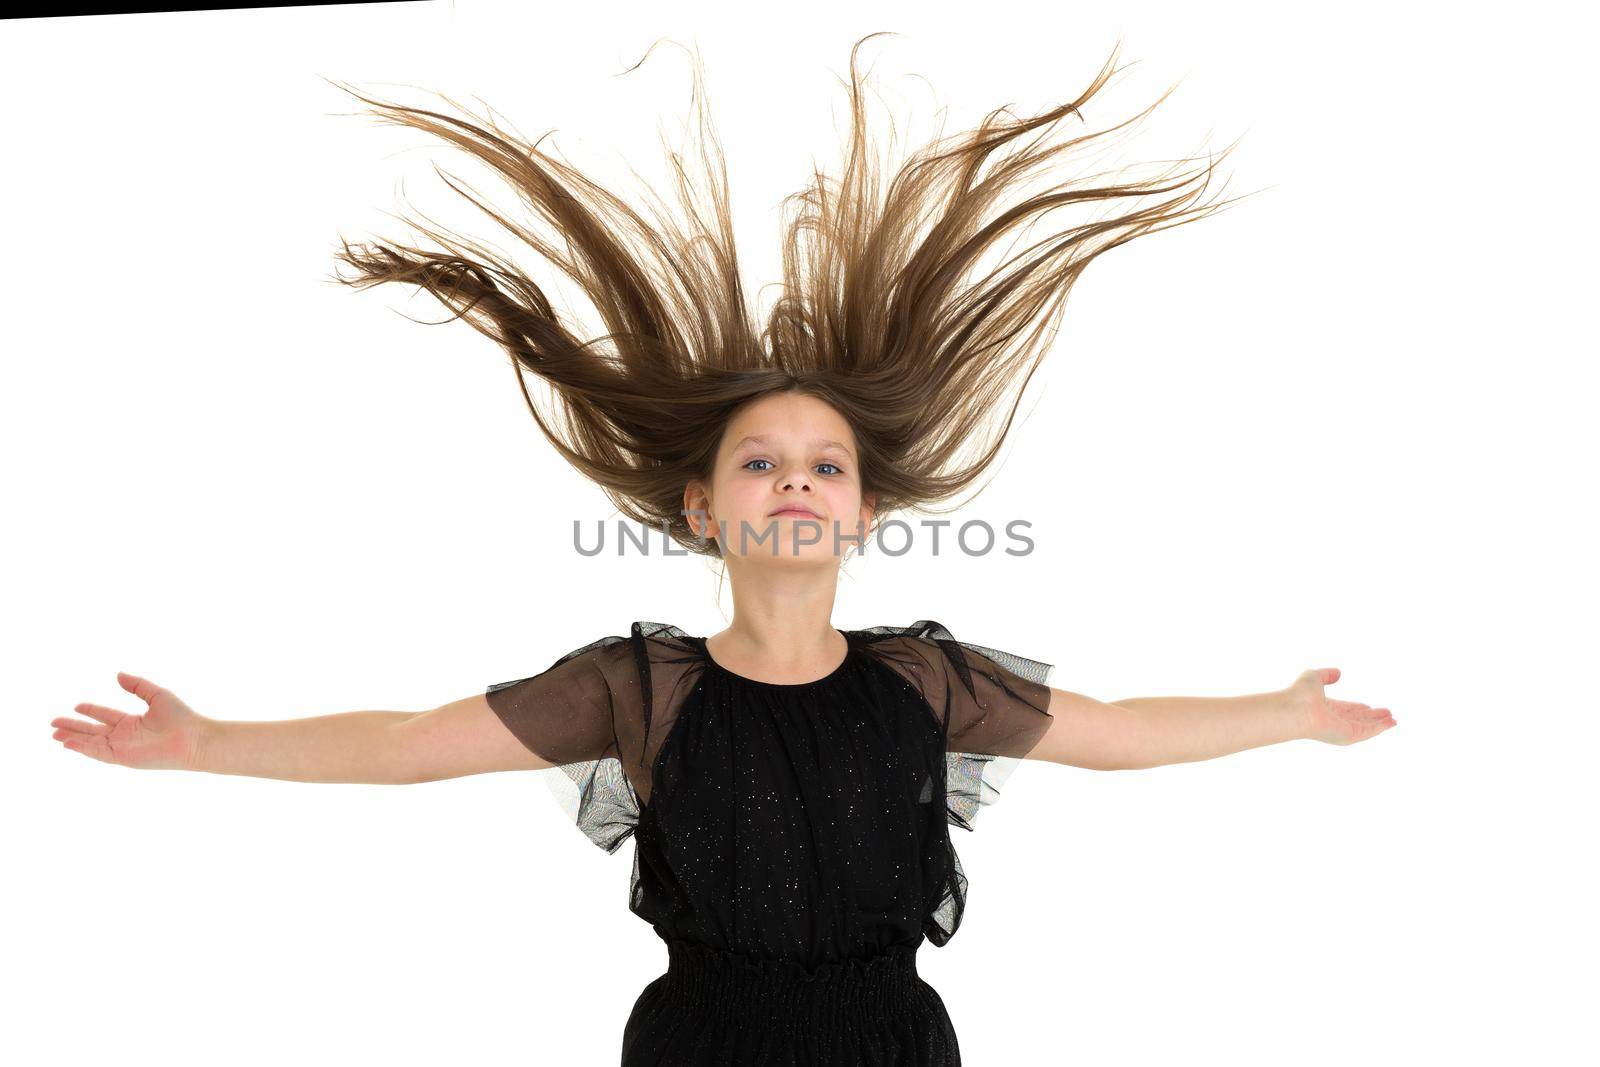 Joyful girl with hair blowing up having fun. Happy cute girl in stylish black jumpsuit jumping with her hands outstretched against white background. Portrait of lovely child with long brown hair